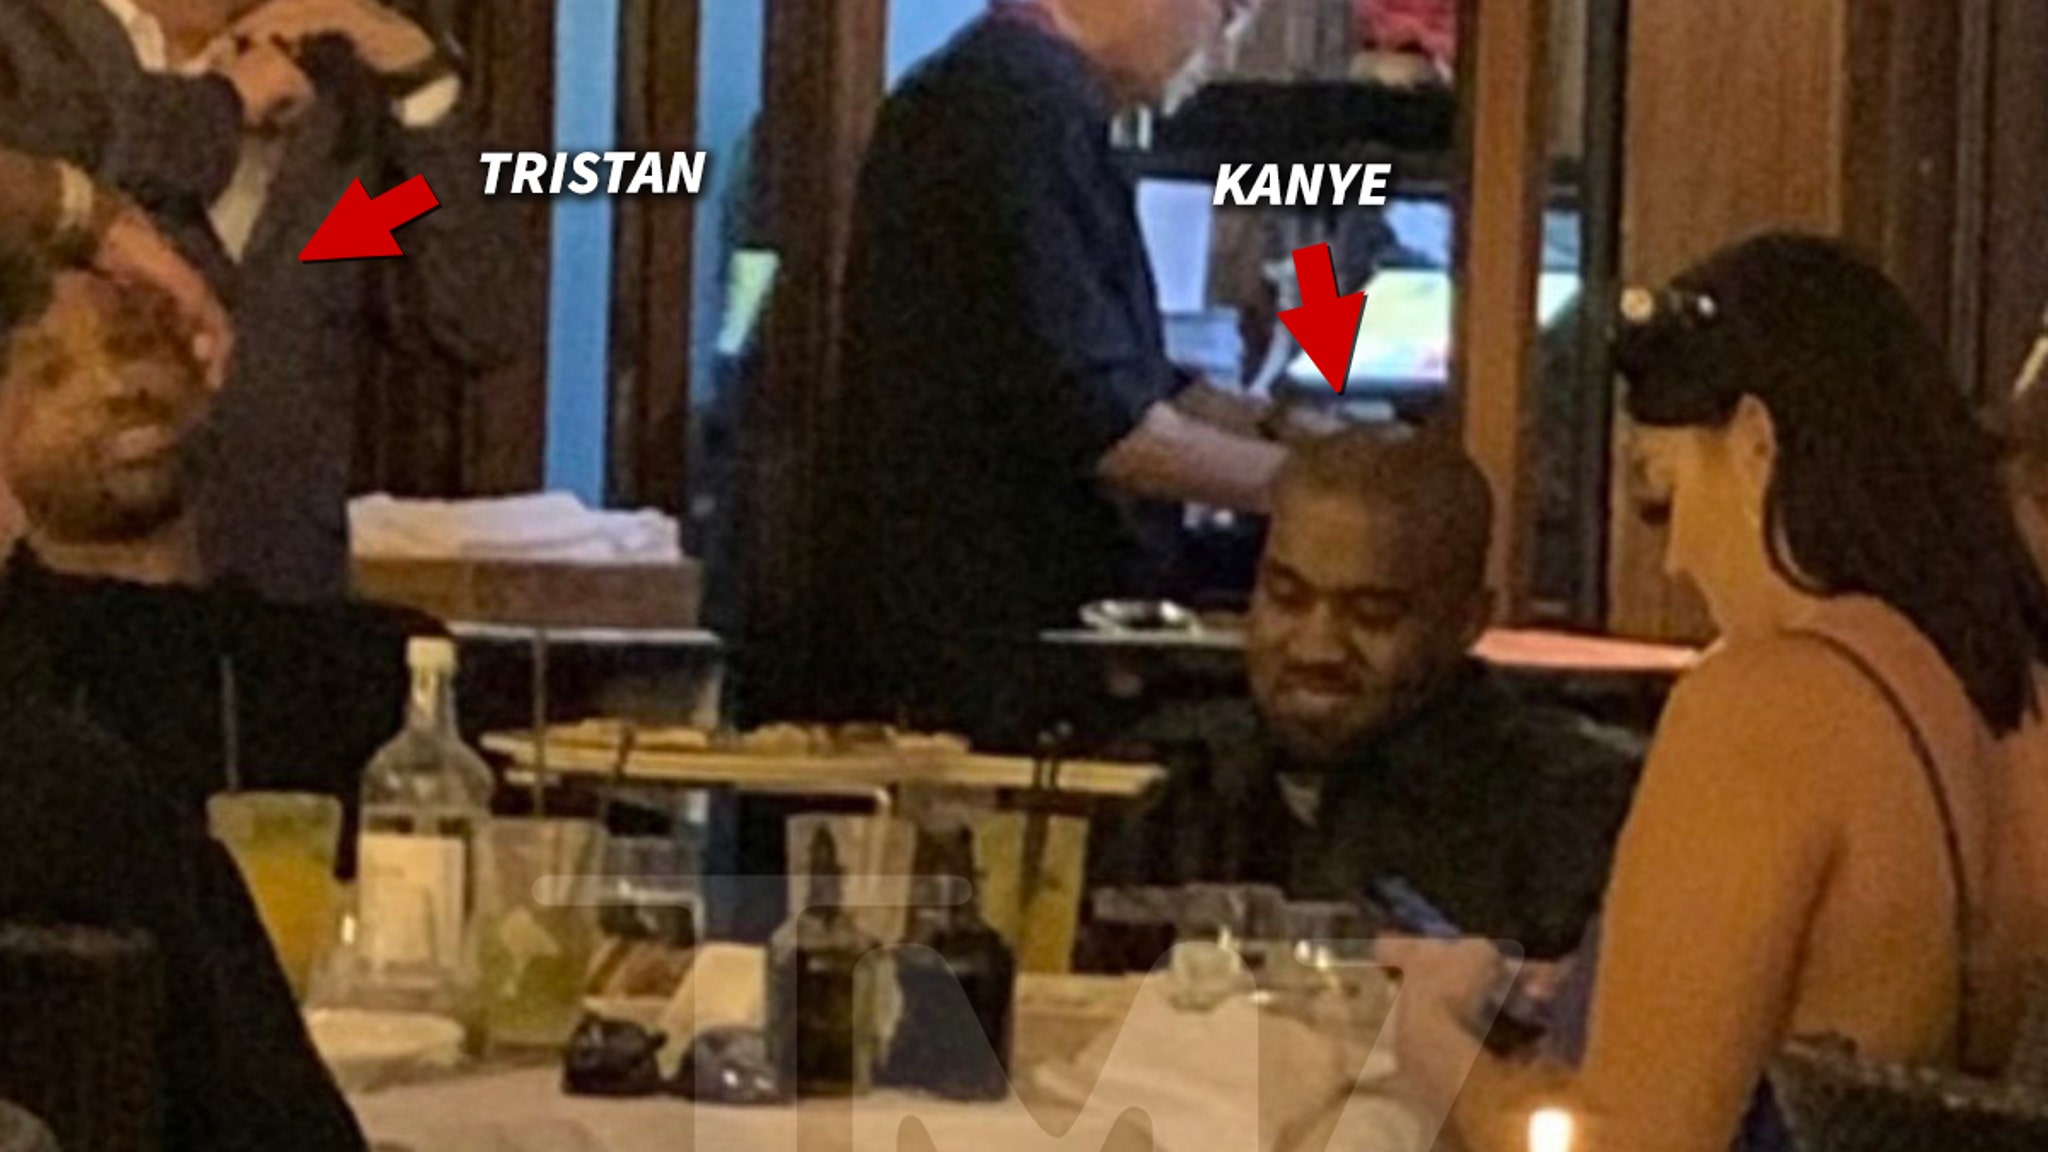 Kanye West & Tristan Thompson Grab Dinner Together in Miami – TMZ